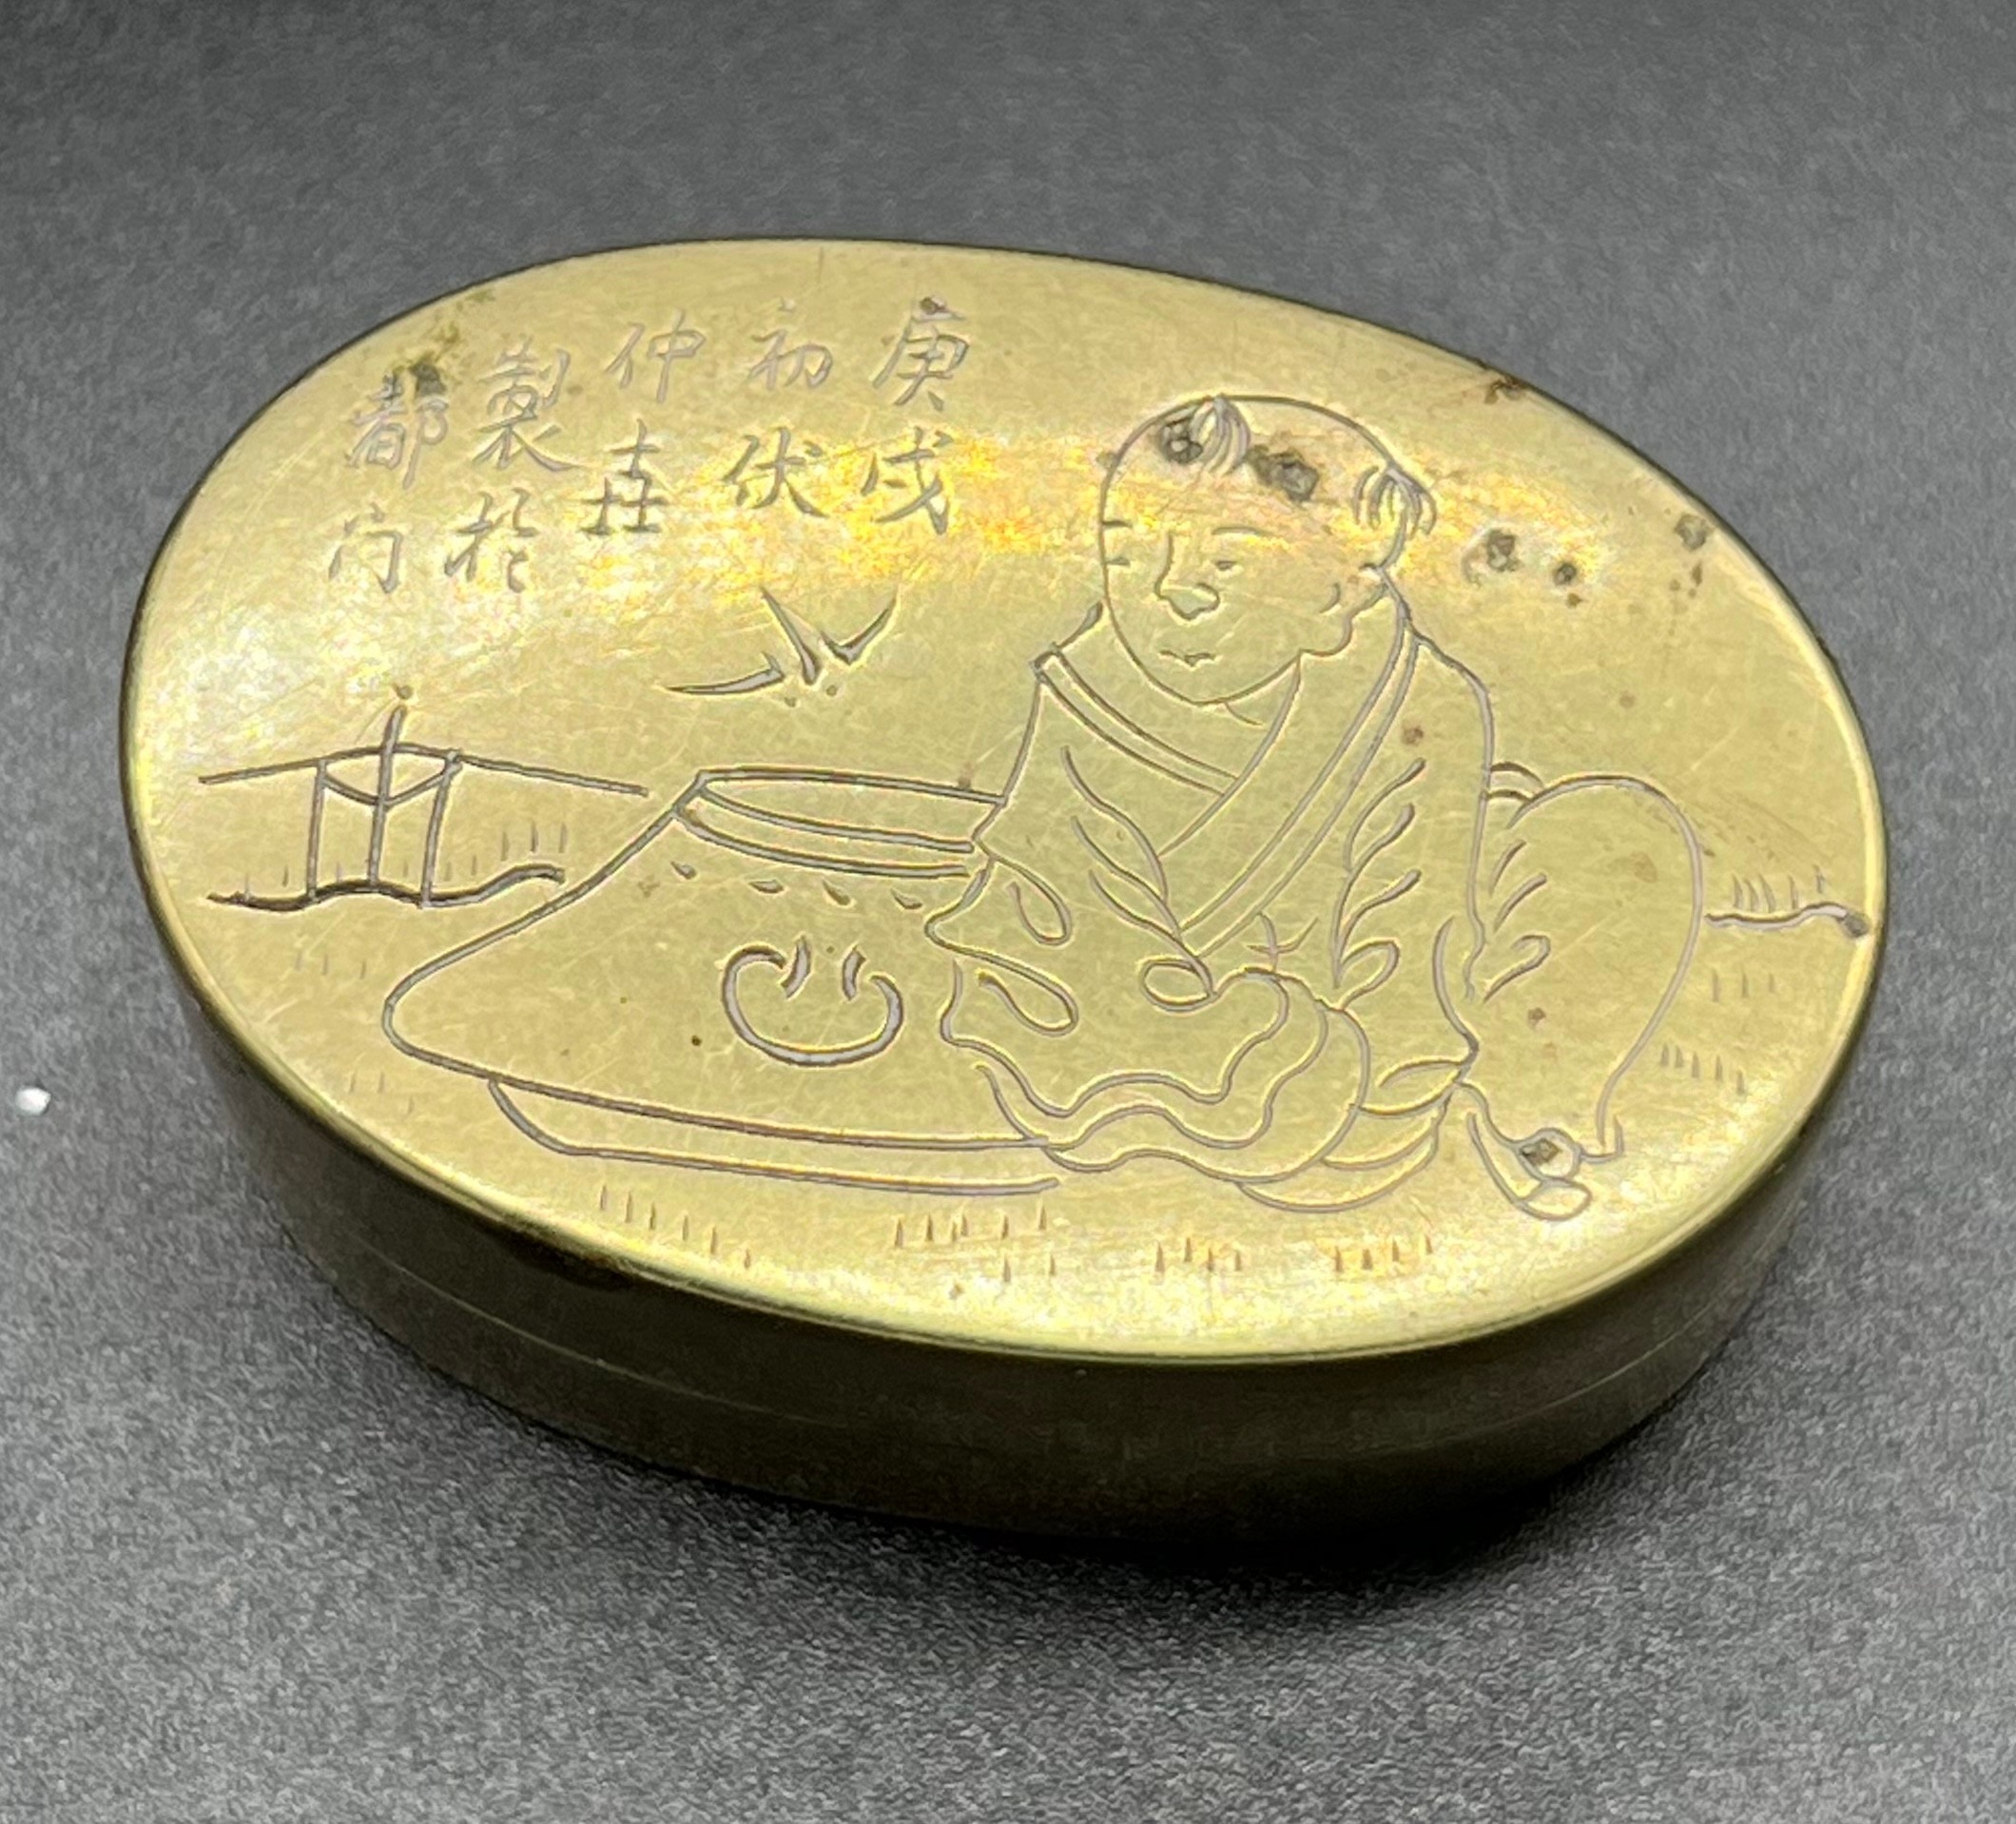 A Small 19th century Qing period Chinese Bronze/ brass engraved lidded box, designed with sharpening